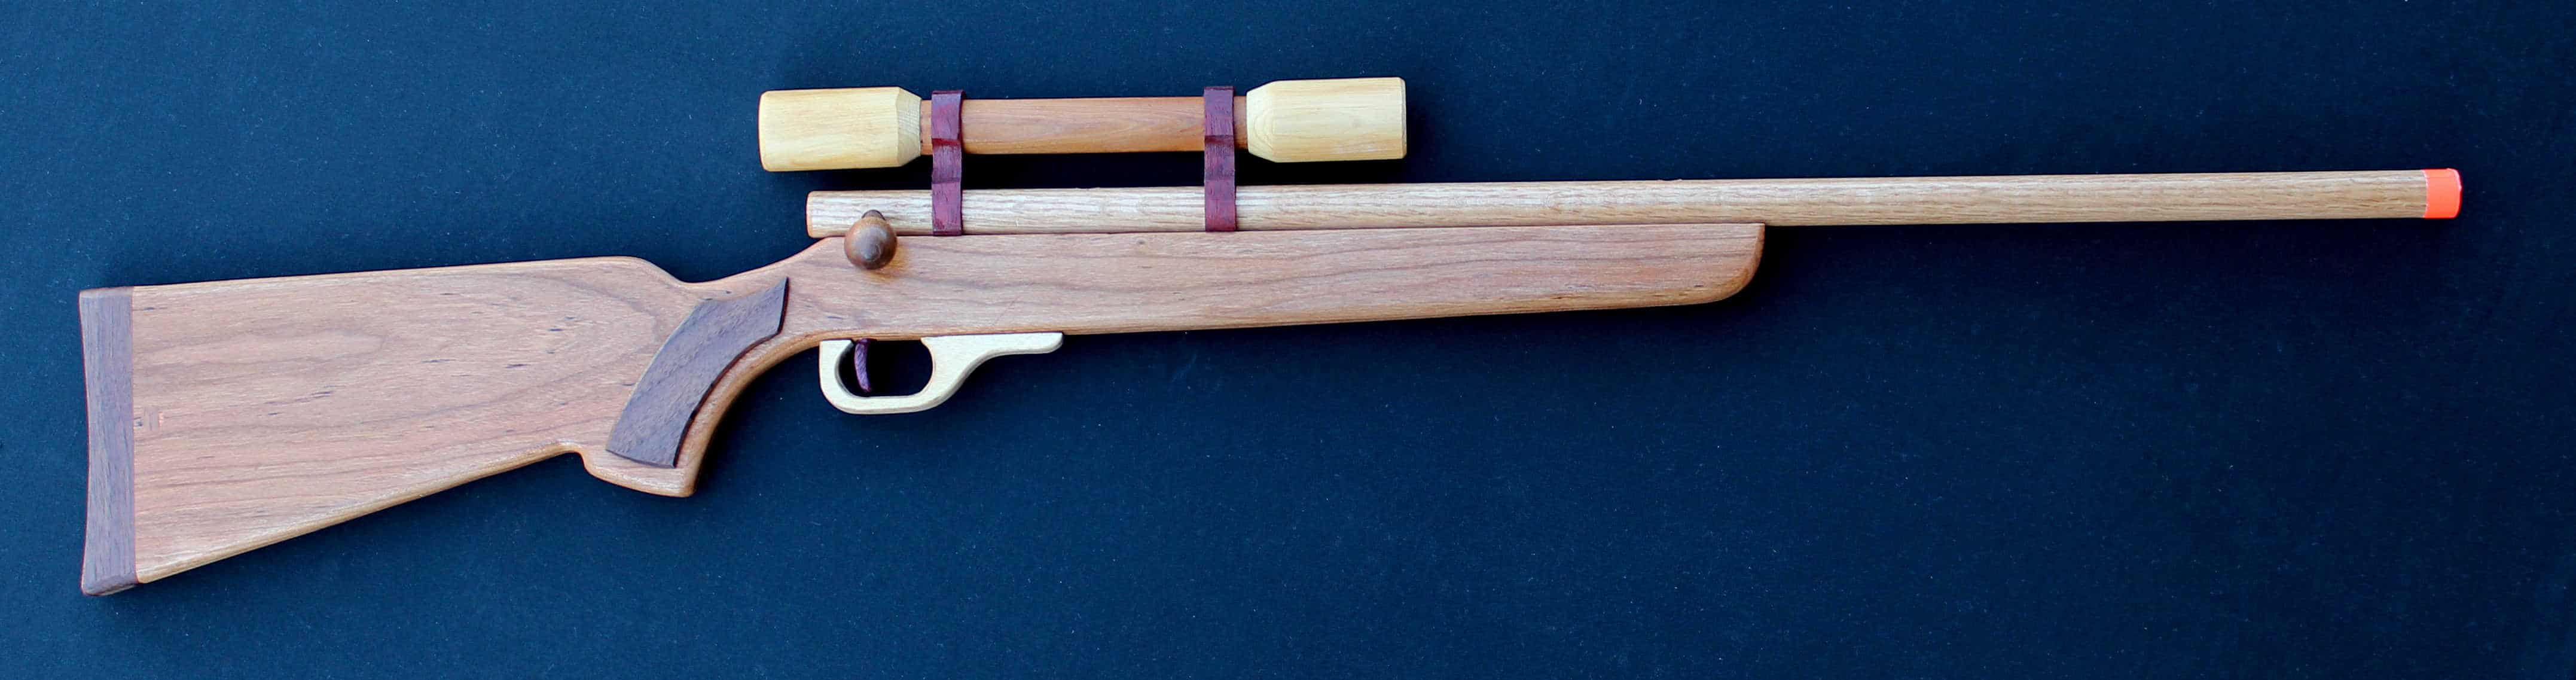 Woodworking Plans wood weapons - Forest Street Designs